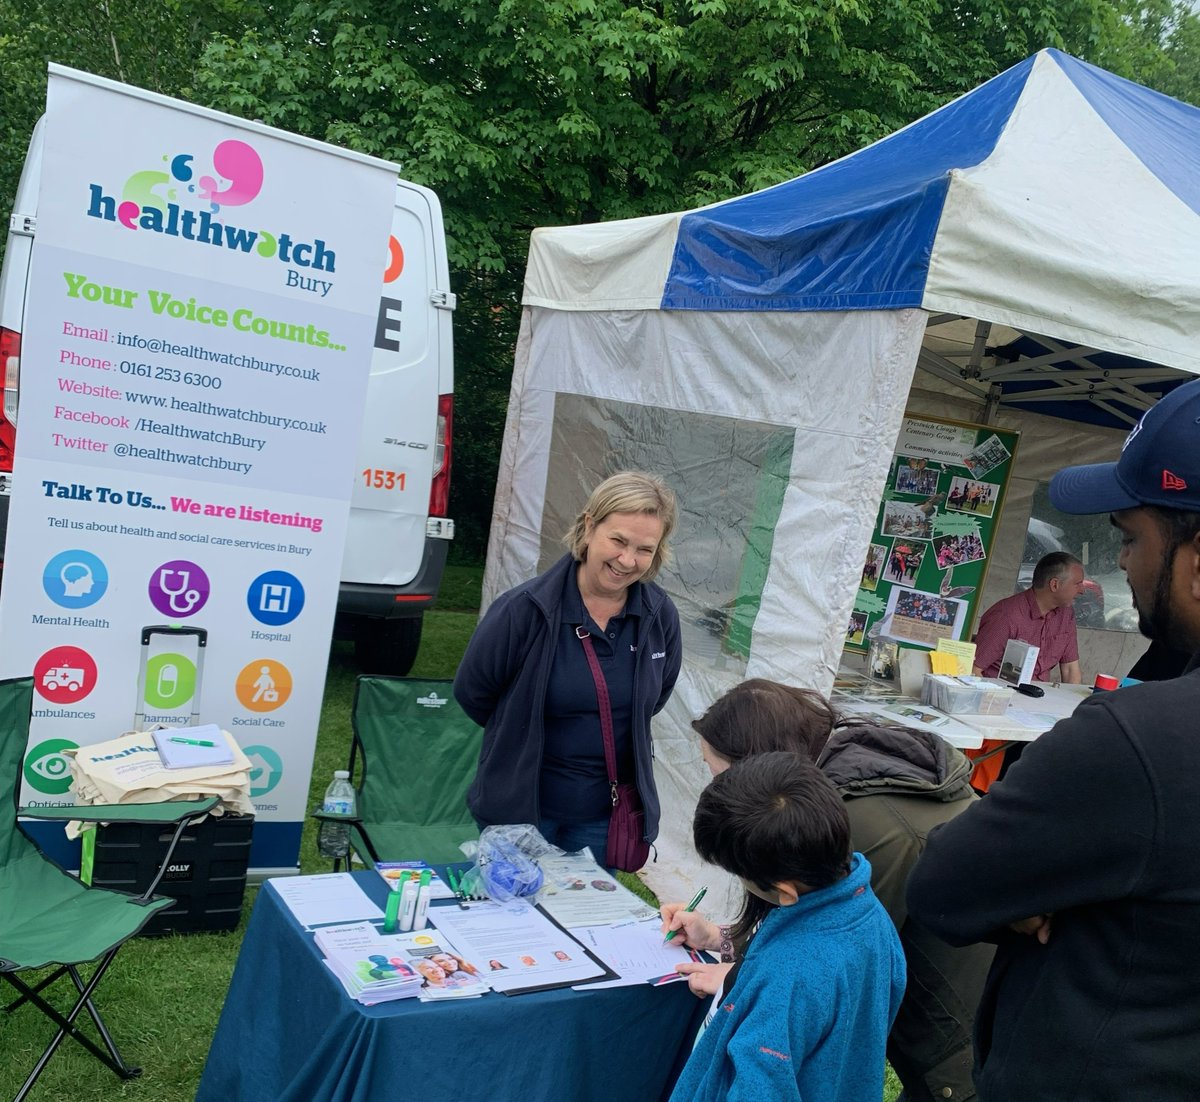 If you are attending Prestwich Clough Day today look out for the Healthwatch Bury stall. We can support you with your health and care enquiries. 🗓️Sun 19th May from 12pm – 5pm 📌St Mary’s Flower Park, #Prestwich For more info visit: prestwichclough.co.uk